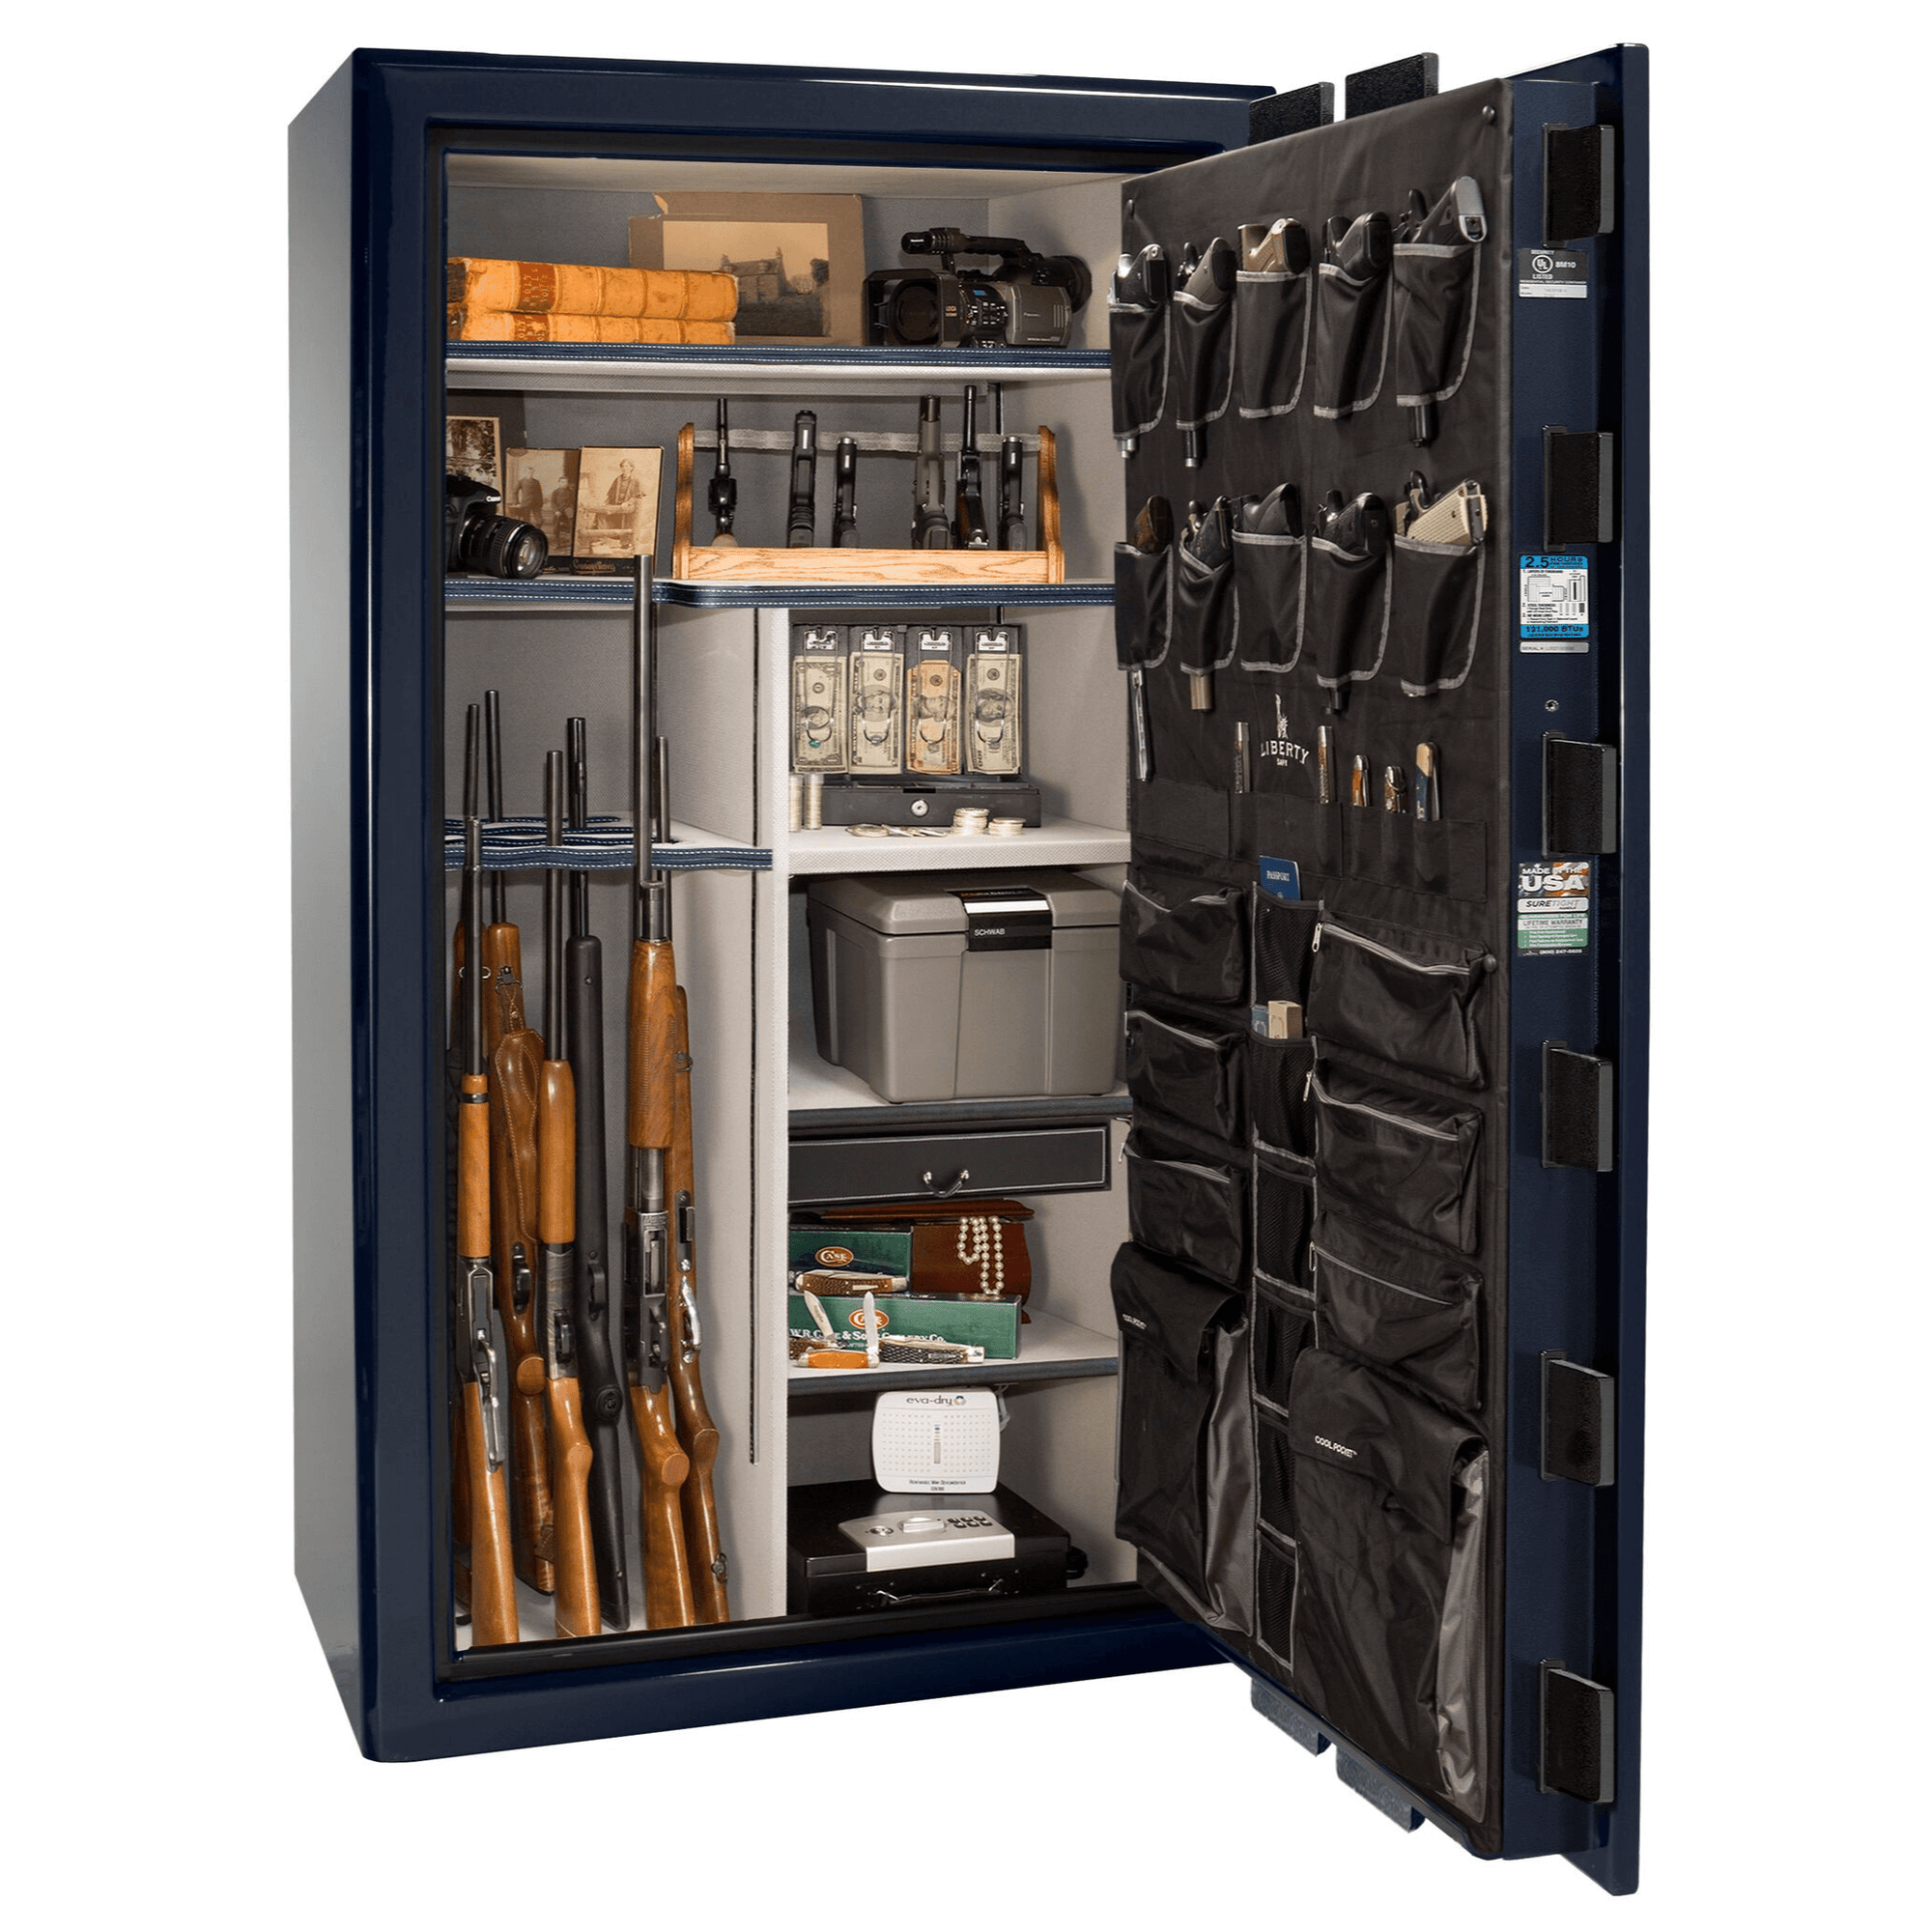 Presidential | 50 | Level 8 Security | 150 Minute Fire Protection | Blue Gloss | Chrome Mechanical Lock | 72.5"(H) x 42"(W) x 32"(D)